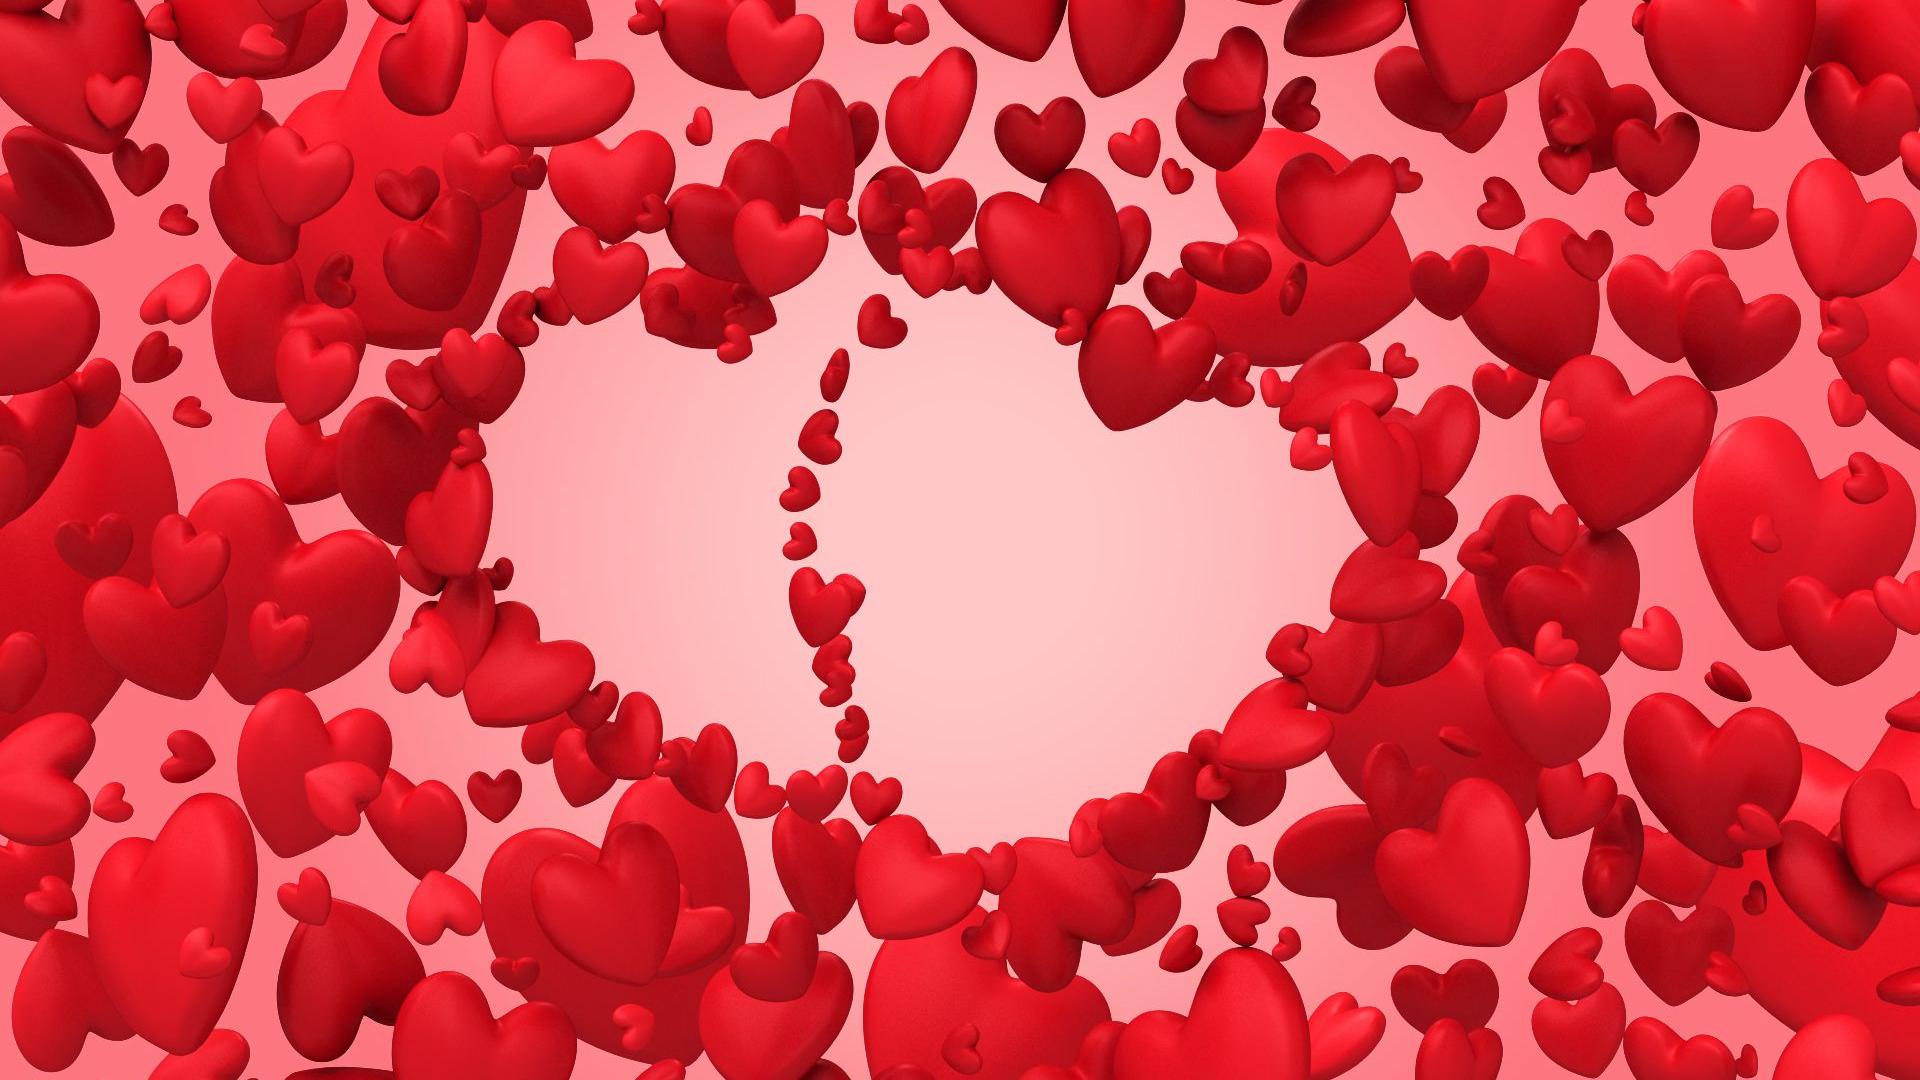 Heart Love Images Full Hd Wallpapers Download Free - Beautiful Red Background With Hearts - HD Wallpaper 